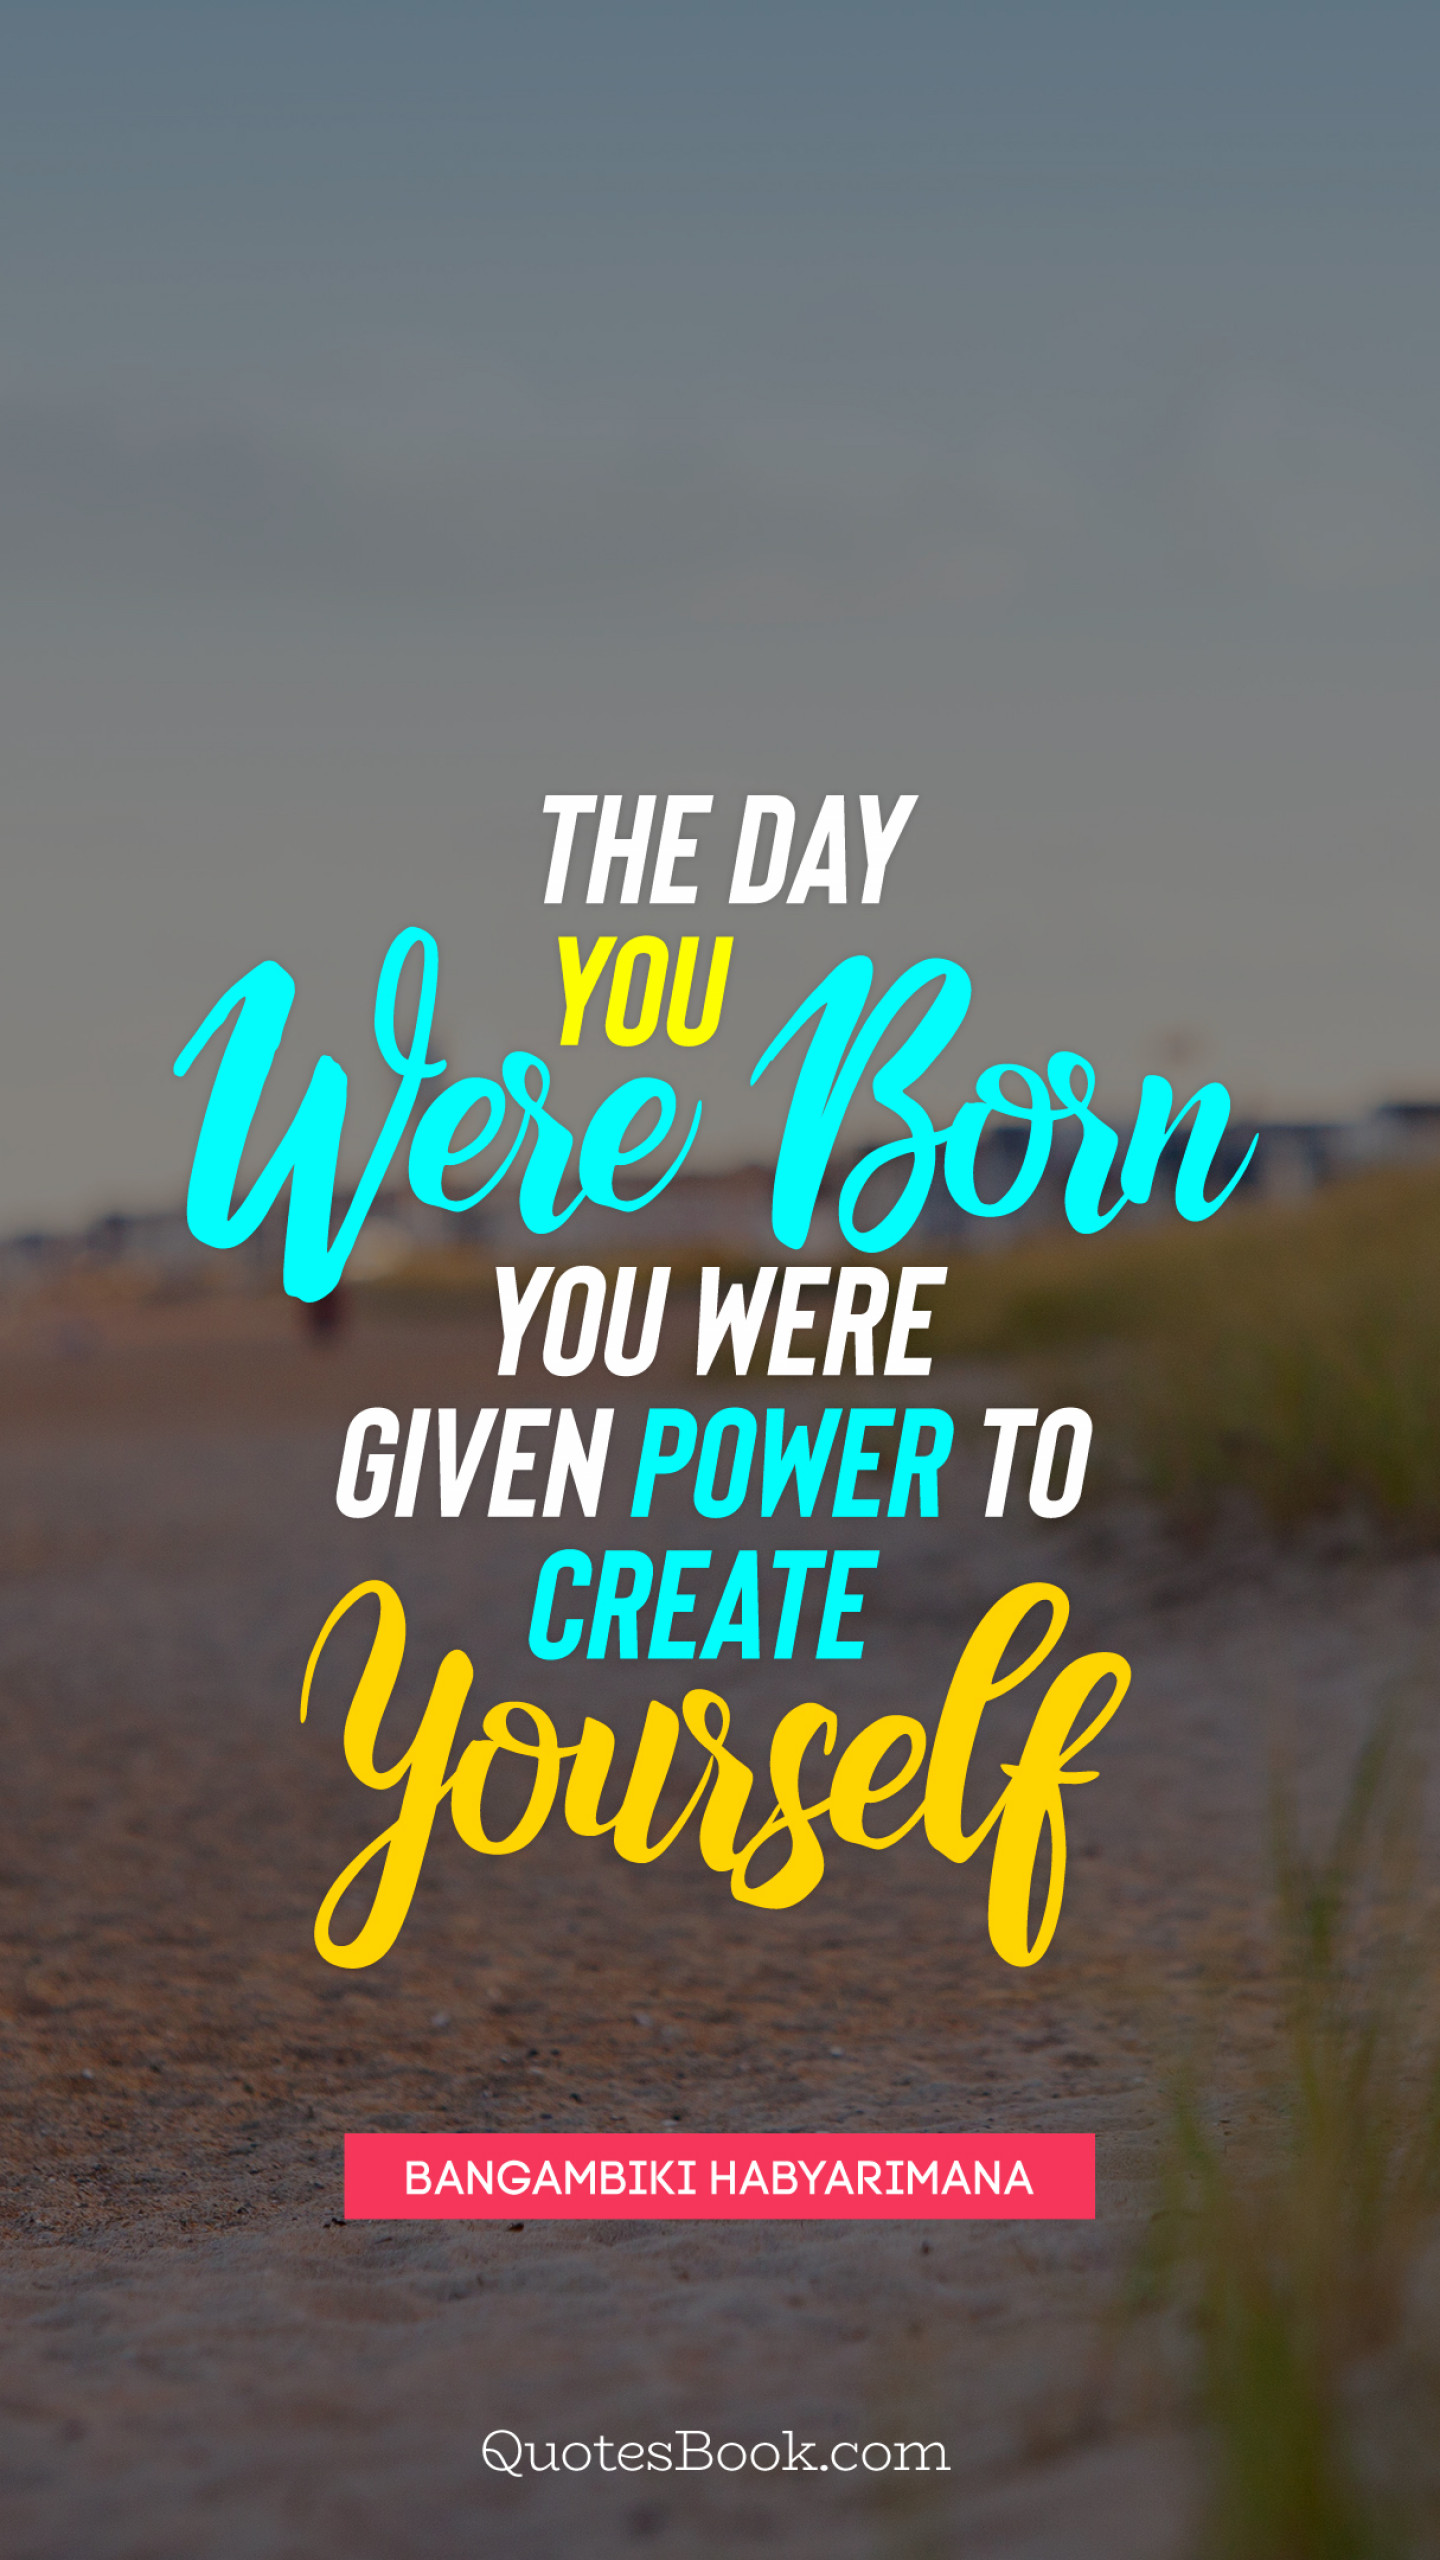 The day you were born you were given power to create yourself. - Quote ...